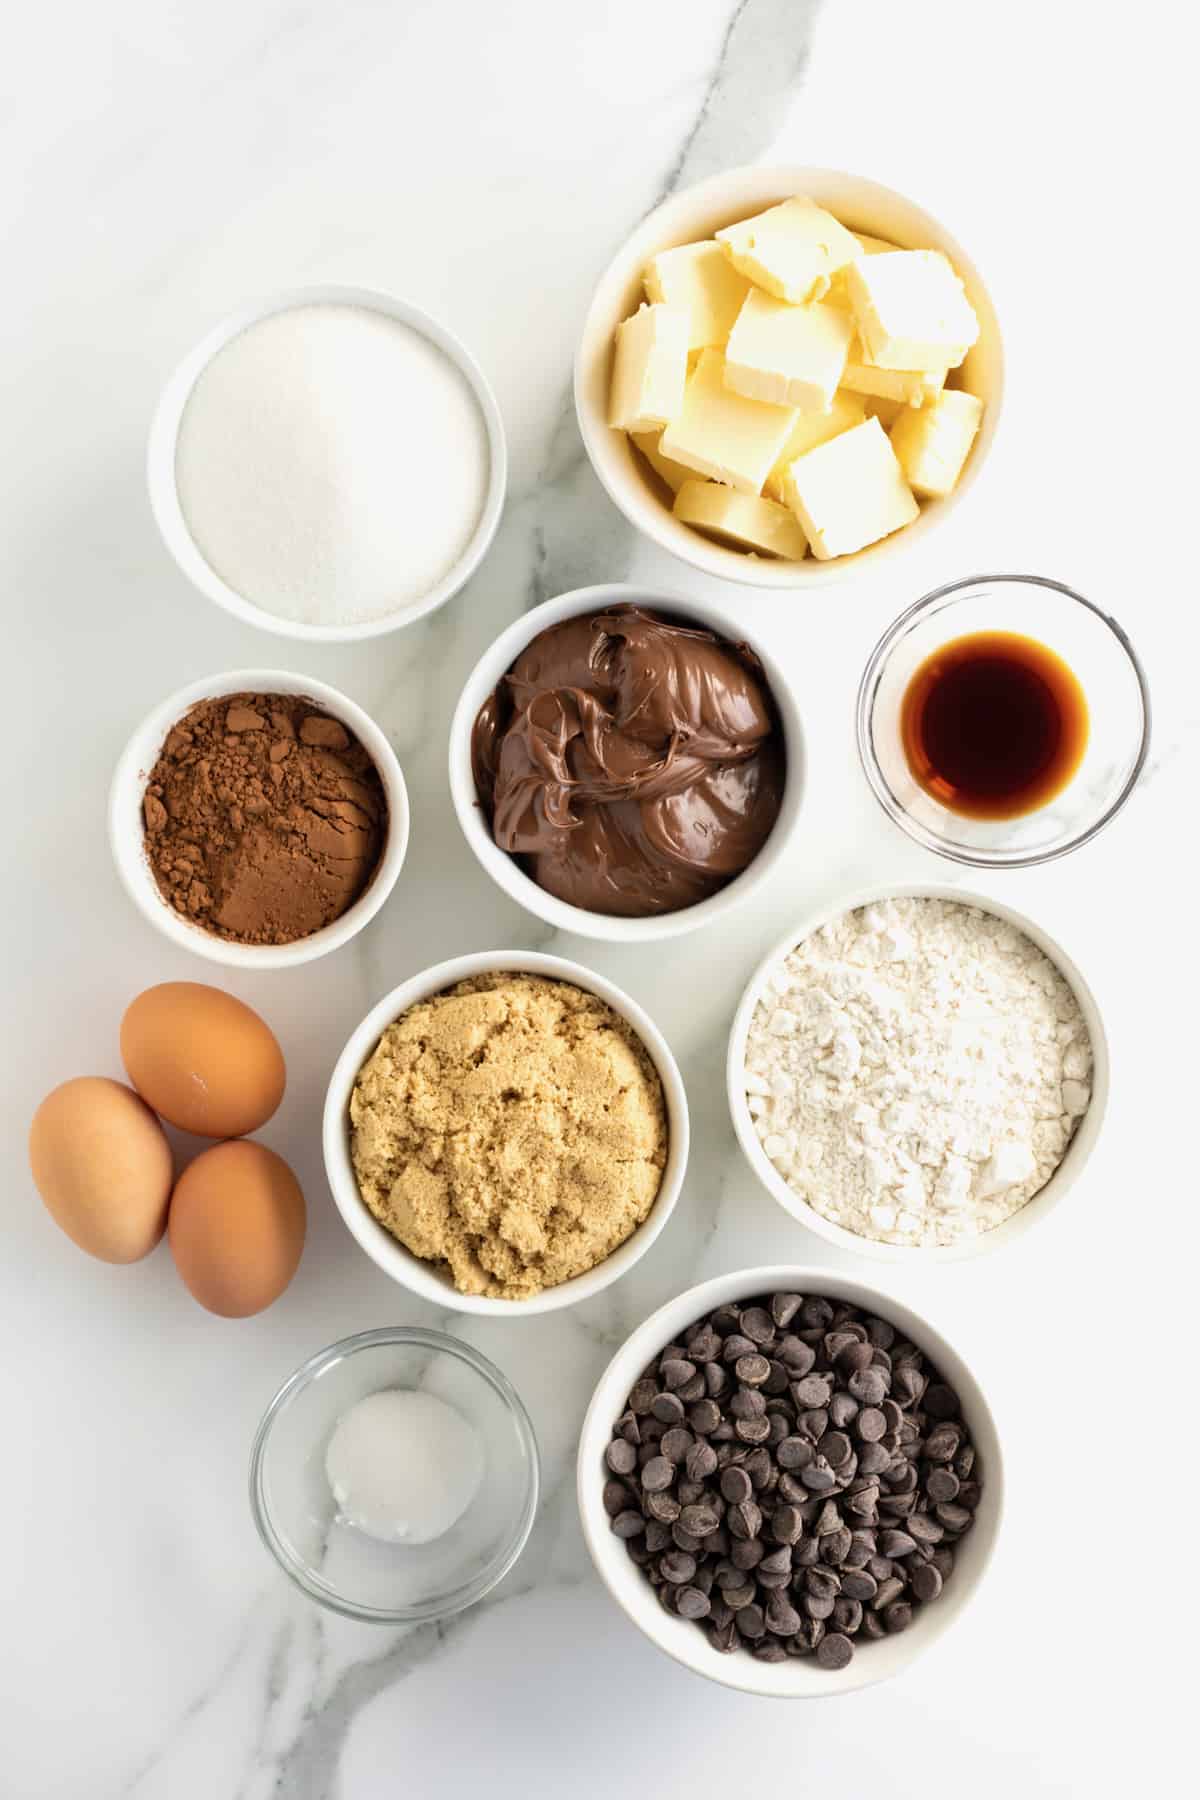 Butter, chocolate chips, granulated sugar, brown sugar, cocoa powder, vanilla, All-purpose flour, kosher salt, Nutella chocolate hazelnut spread in small containers on a white counter top next to three large brown eggs.
